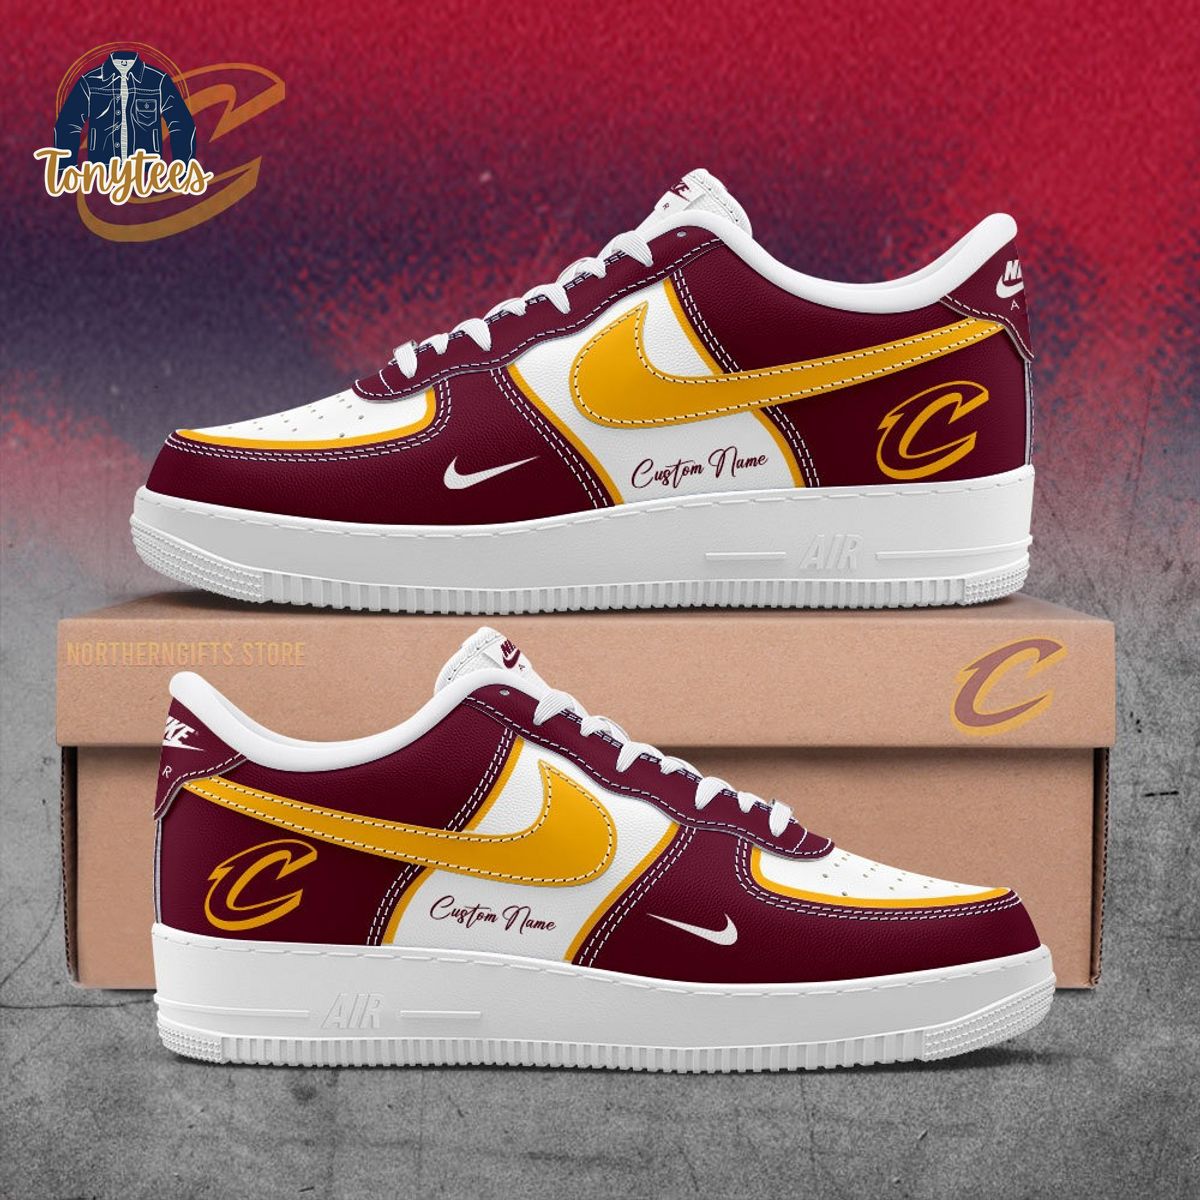 Cleveland Cavaliers Custom Name Air Force 1 Sneaker